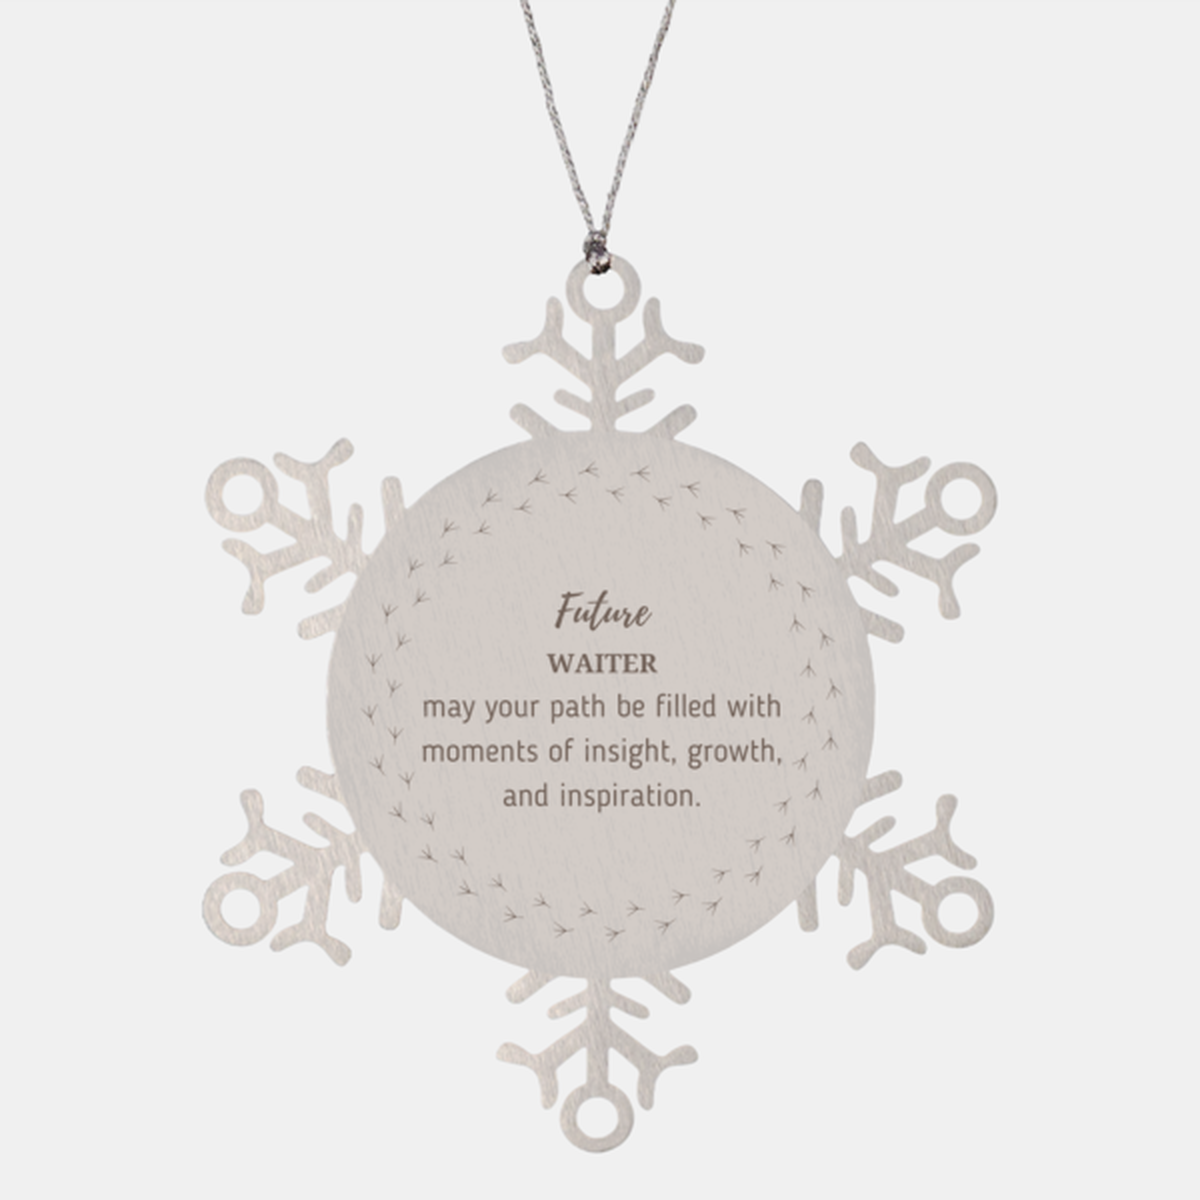 Future Waiter Gifts, May your path be filled with moments of insight, Graduation Gifts for New Waiter, Christmas Unique Snowflake Ornament For Men, Women, Friends